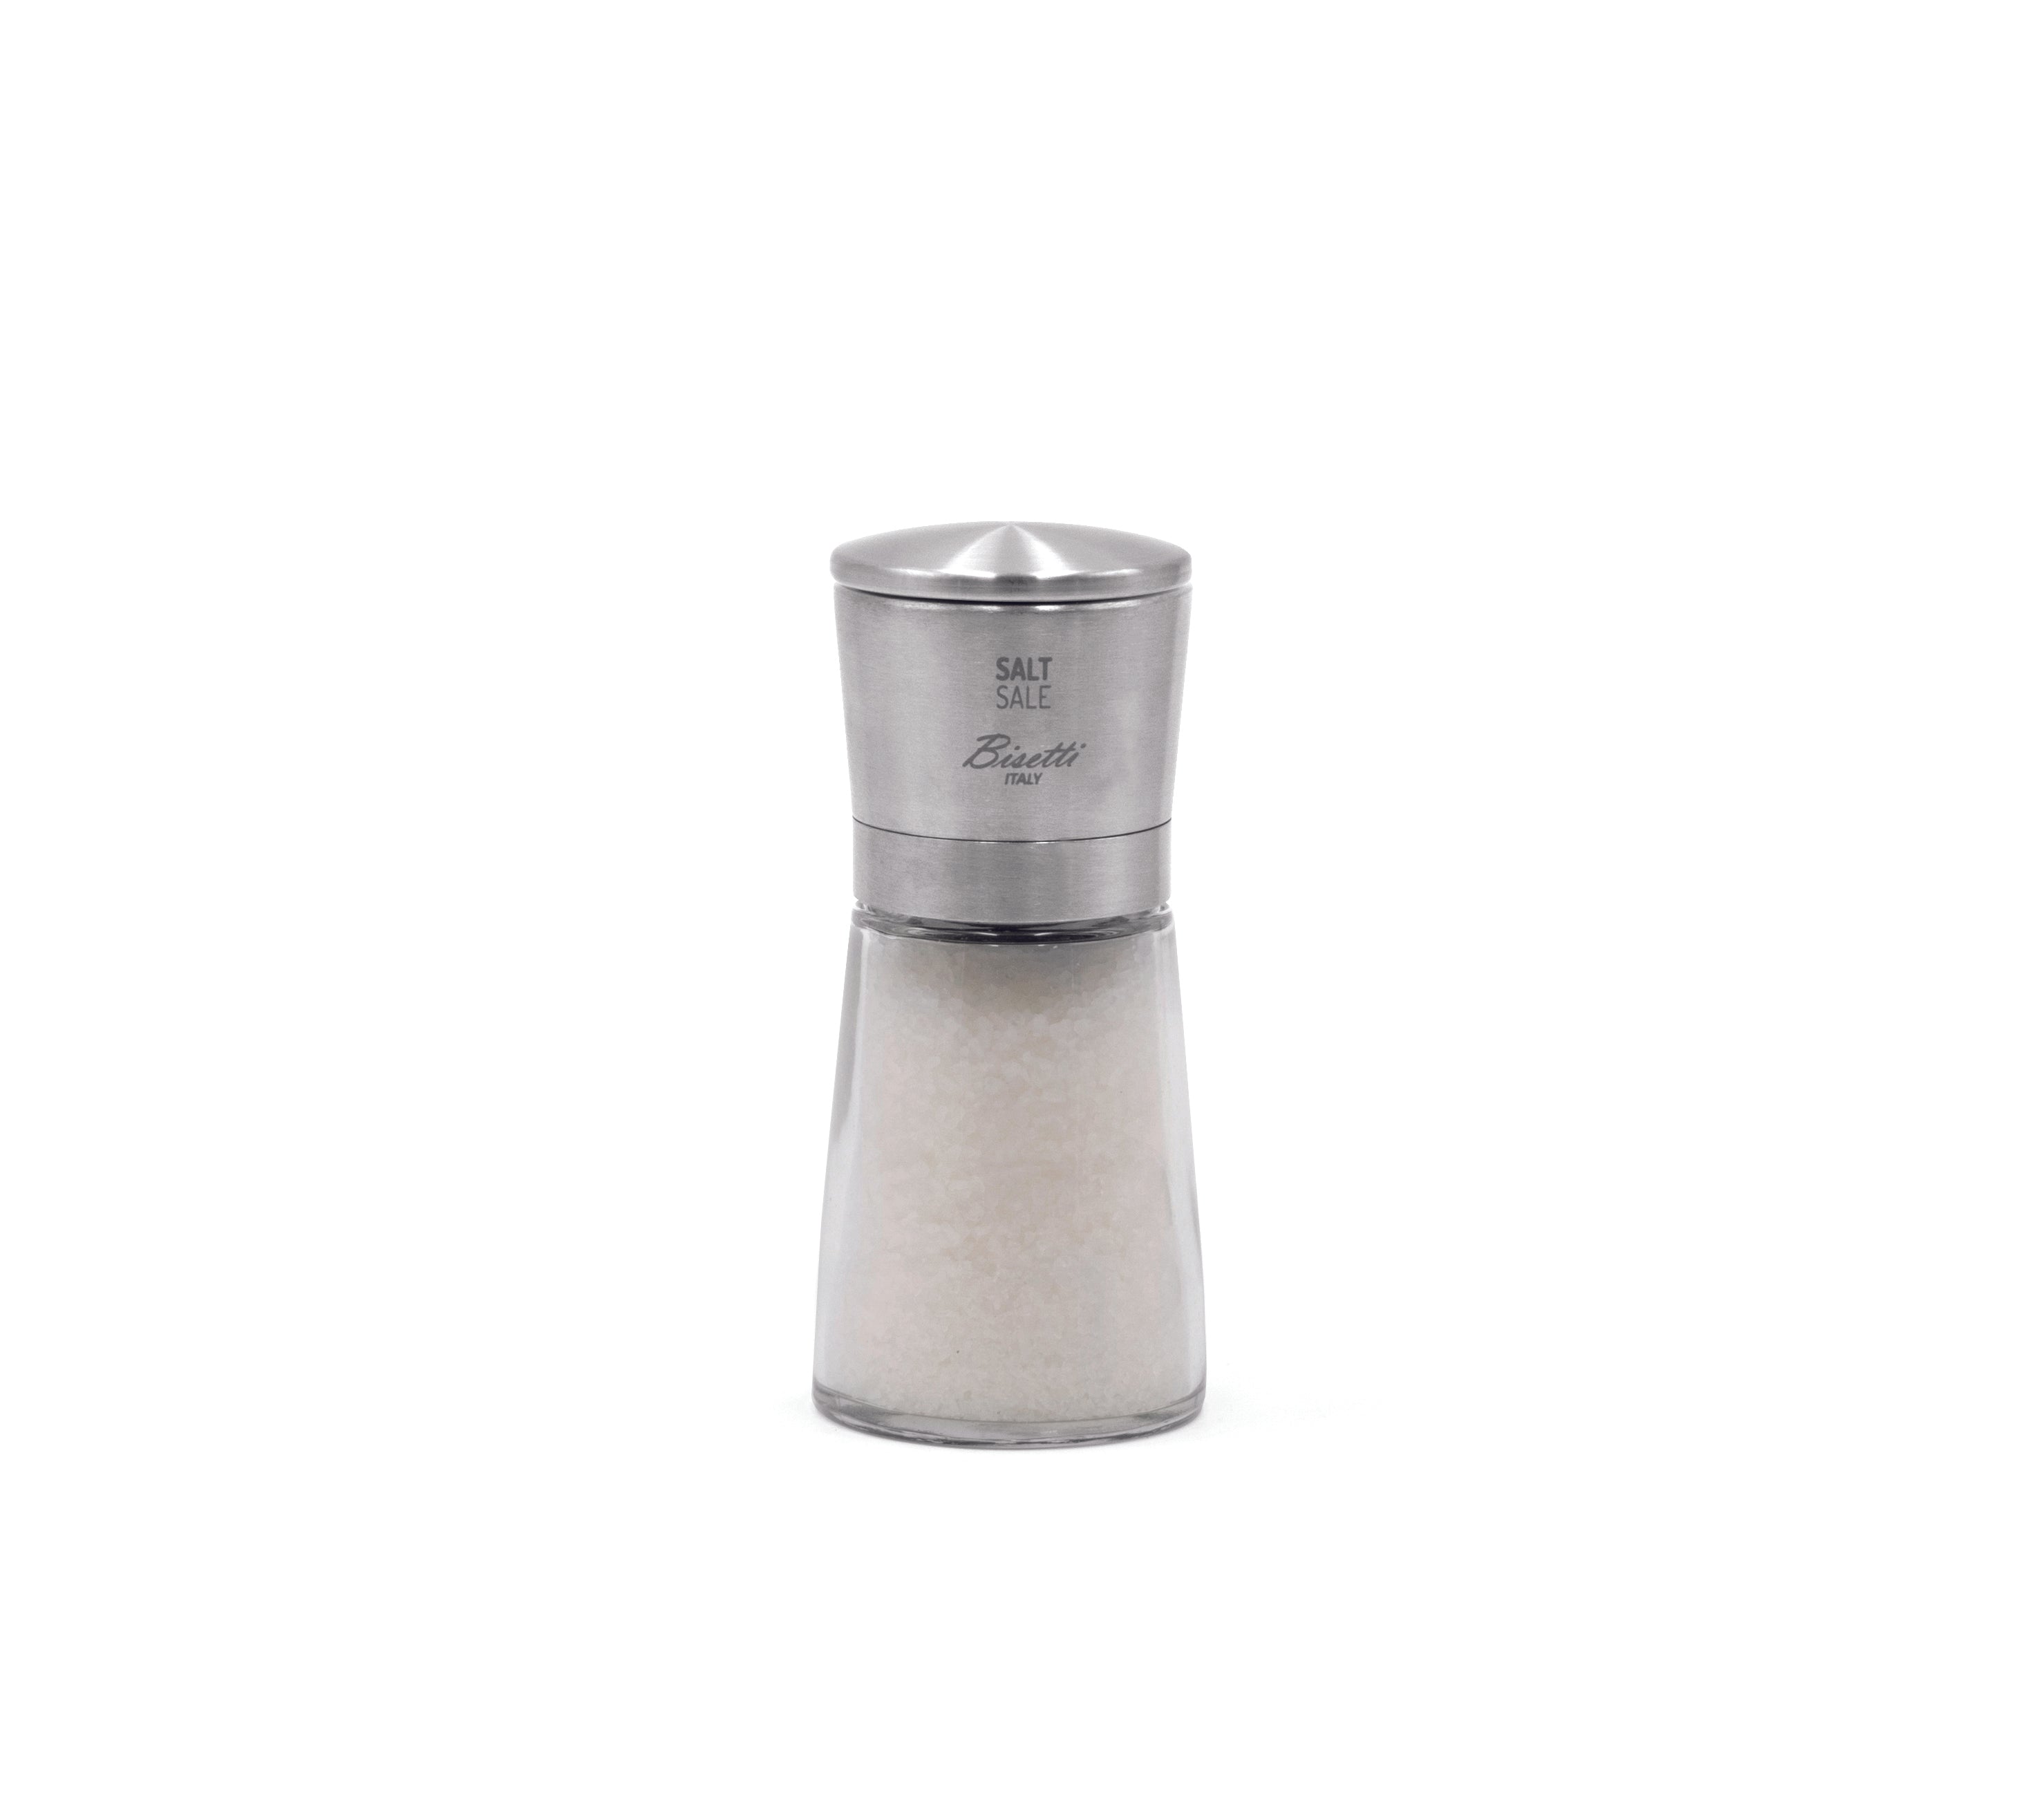 Bisetti Salt Mill - Glass/Stainless Steel, Trasnparent, One Size